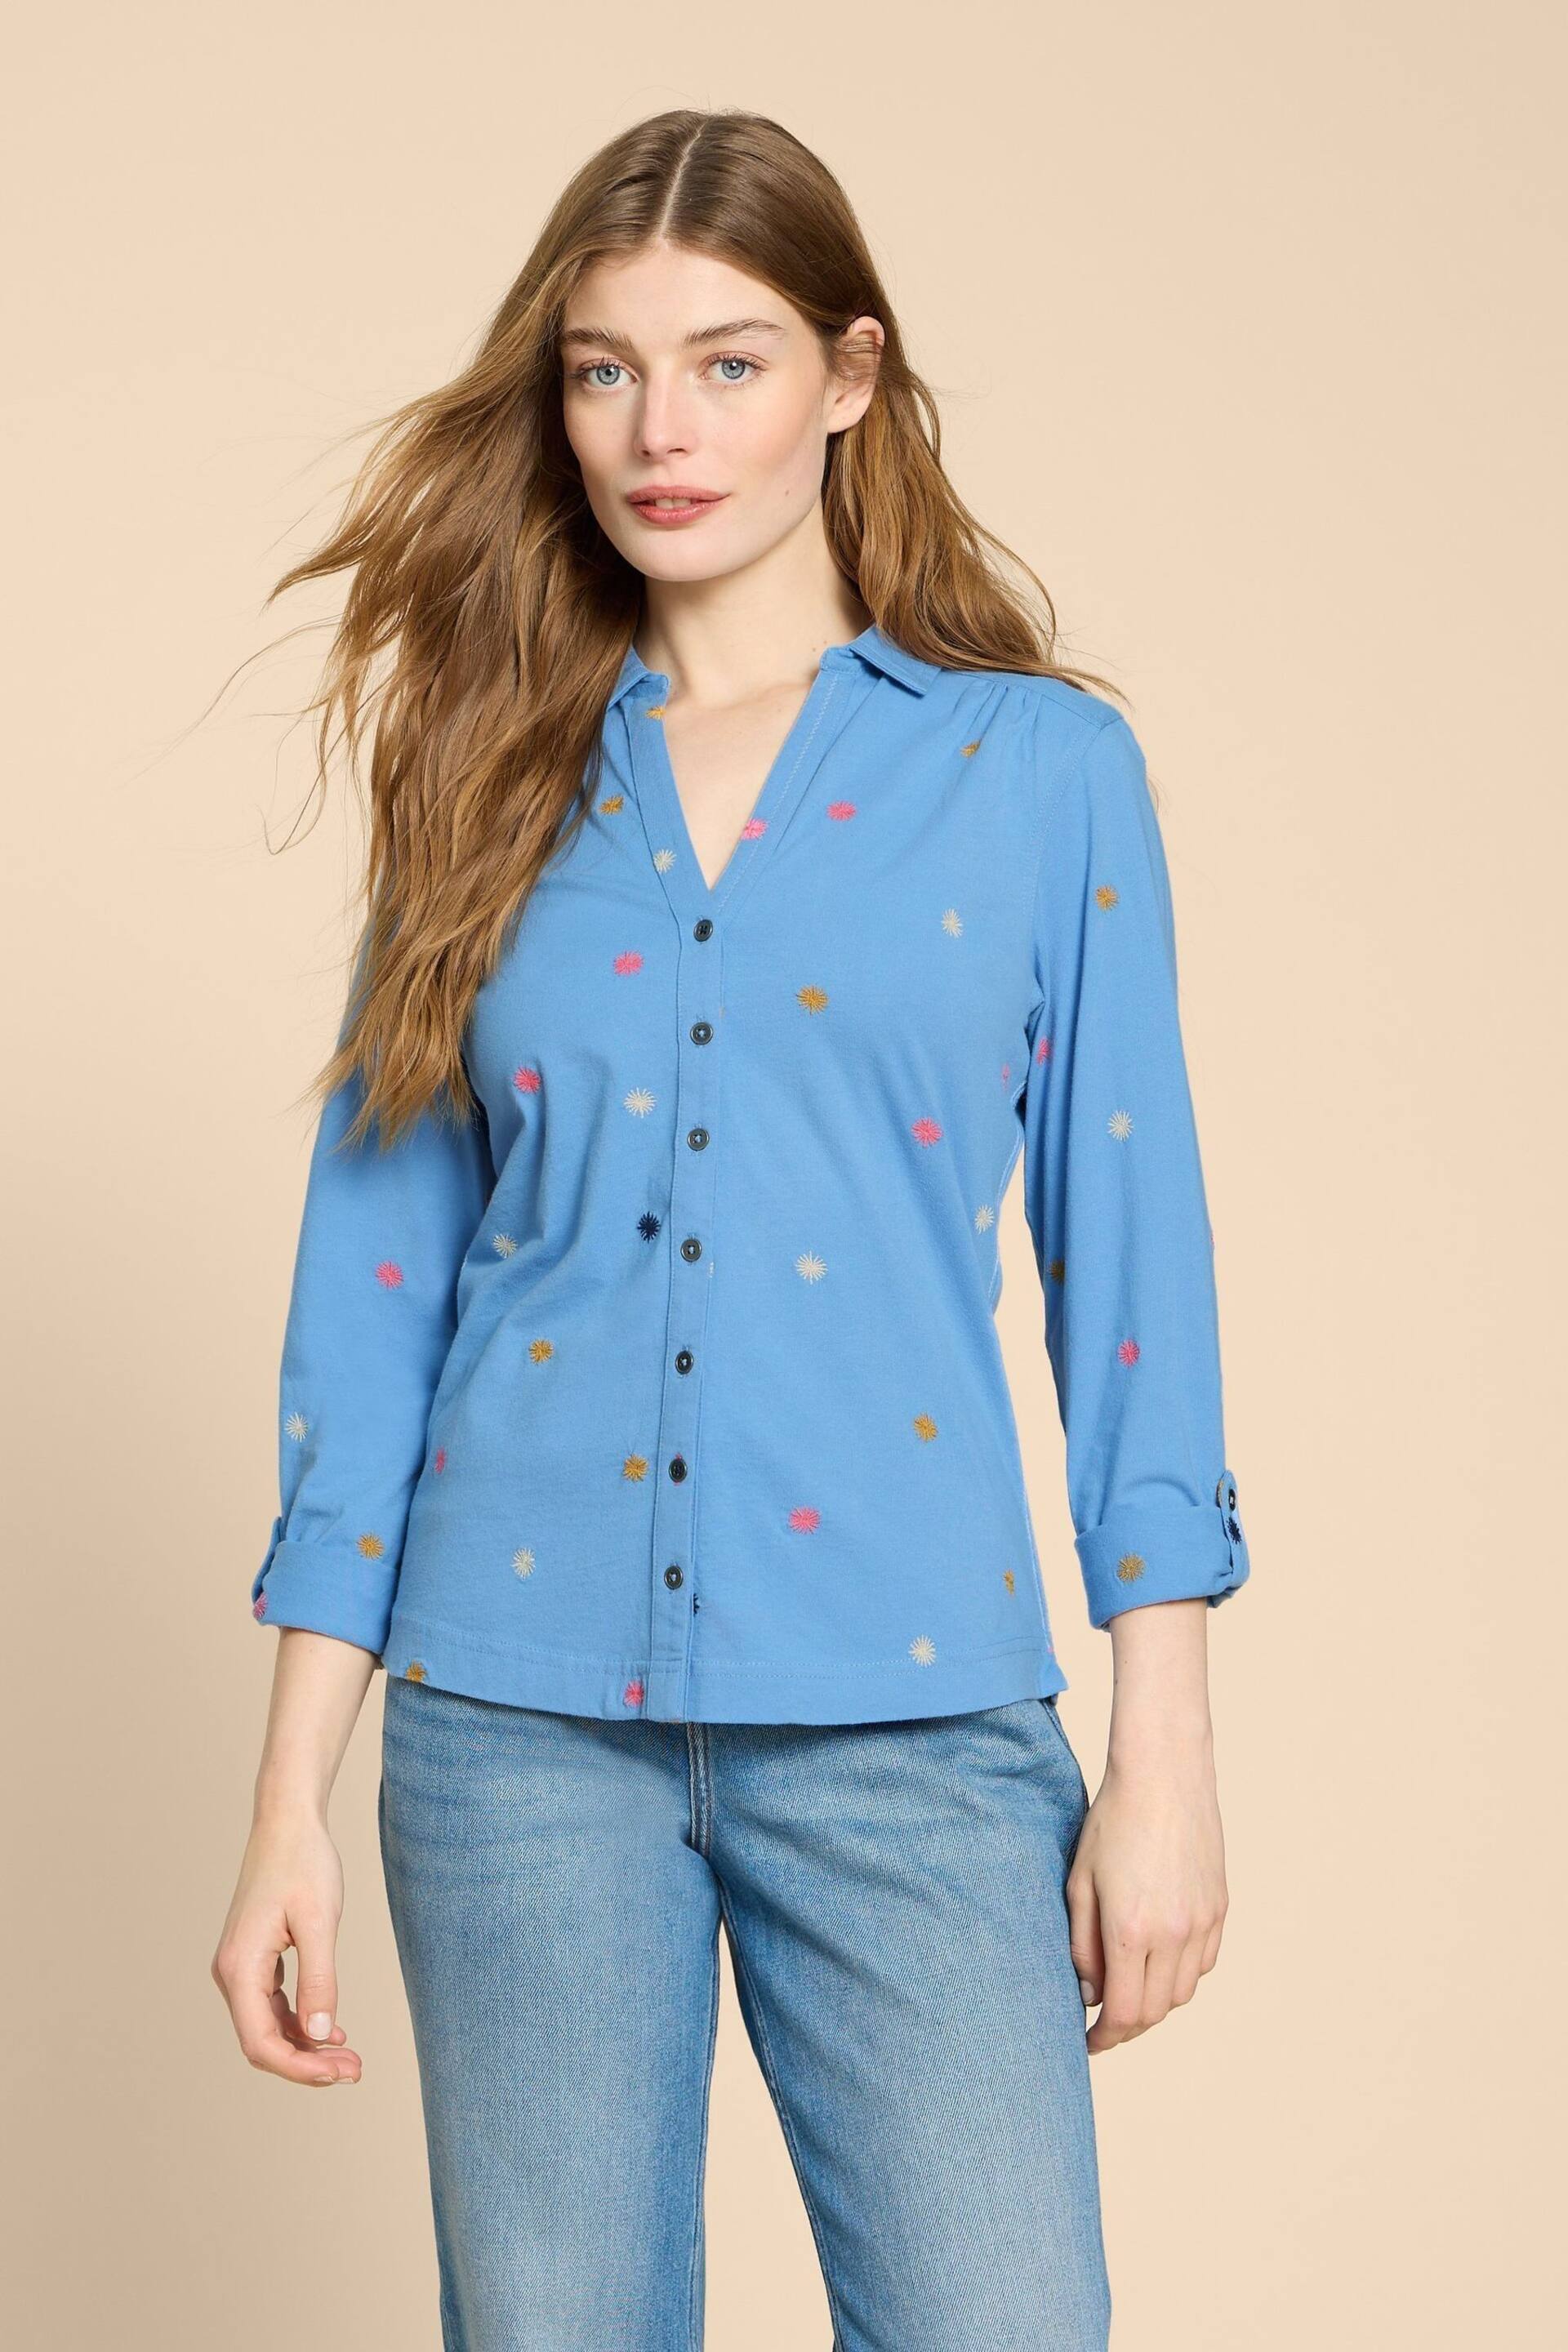 White Stuff Blue Annie Embroidered Jersey Shirt - Image 1 of 7